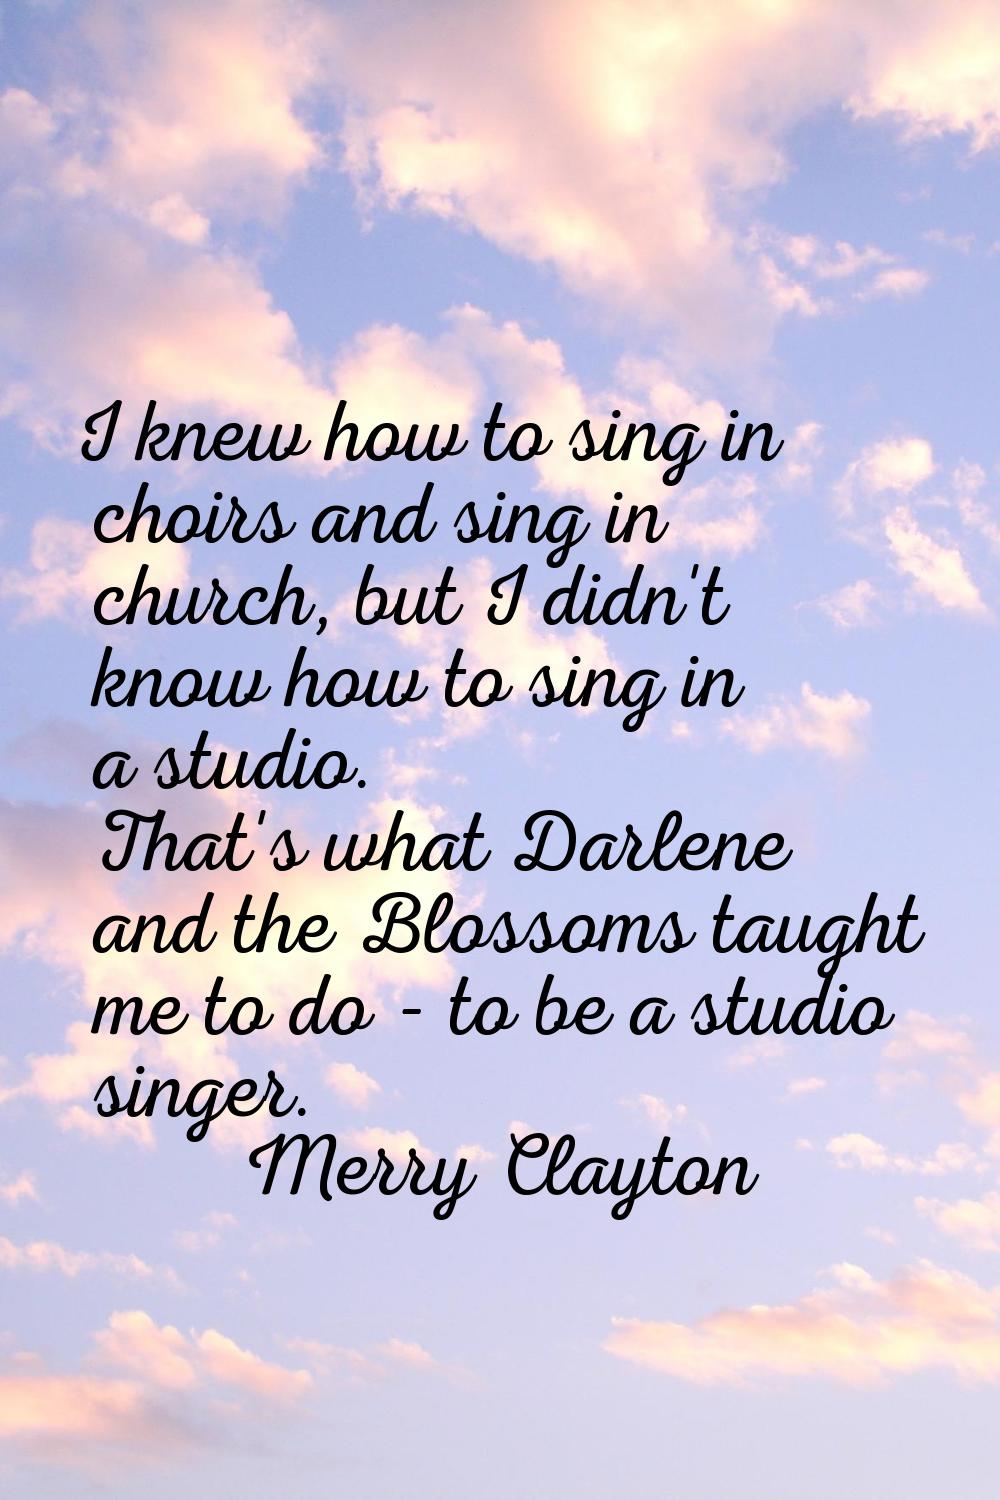 I knew how to sing in choirs and sing in church, but I didn't know how to sing in a studio. That's 